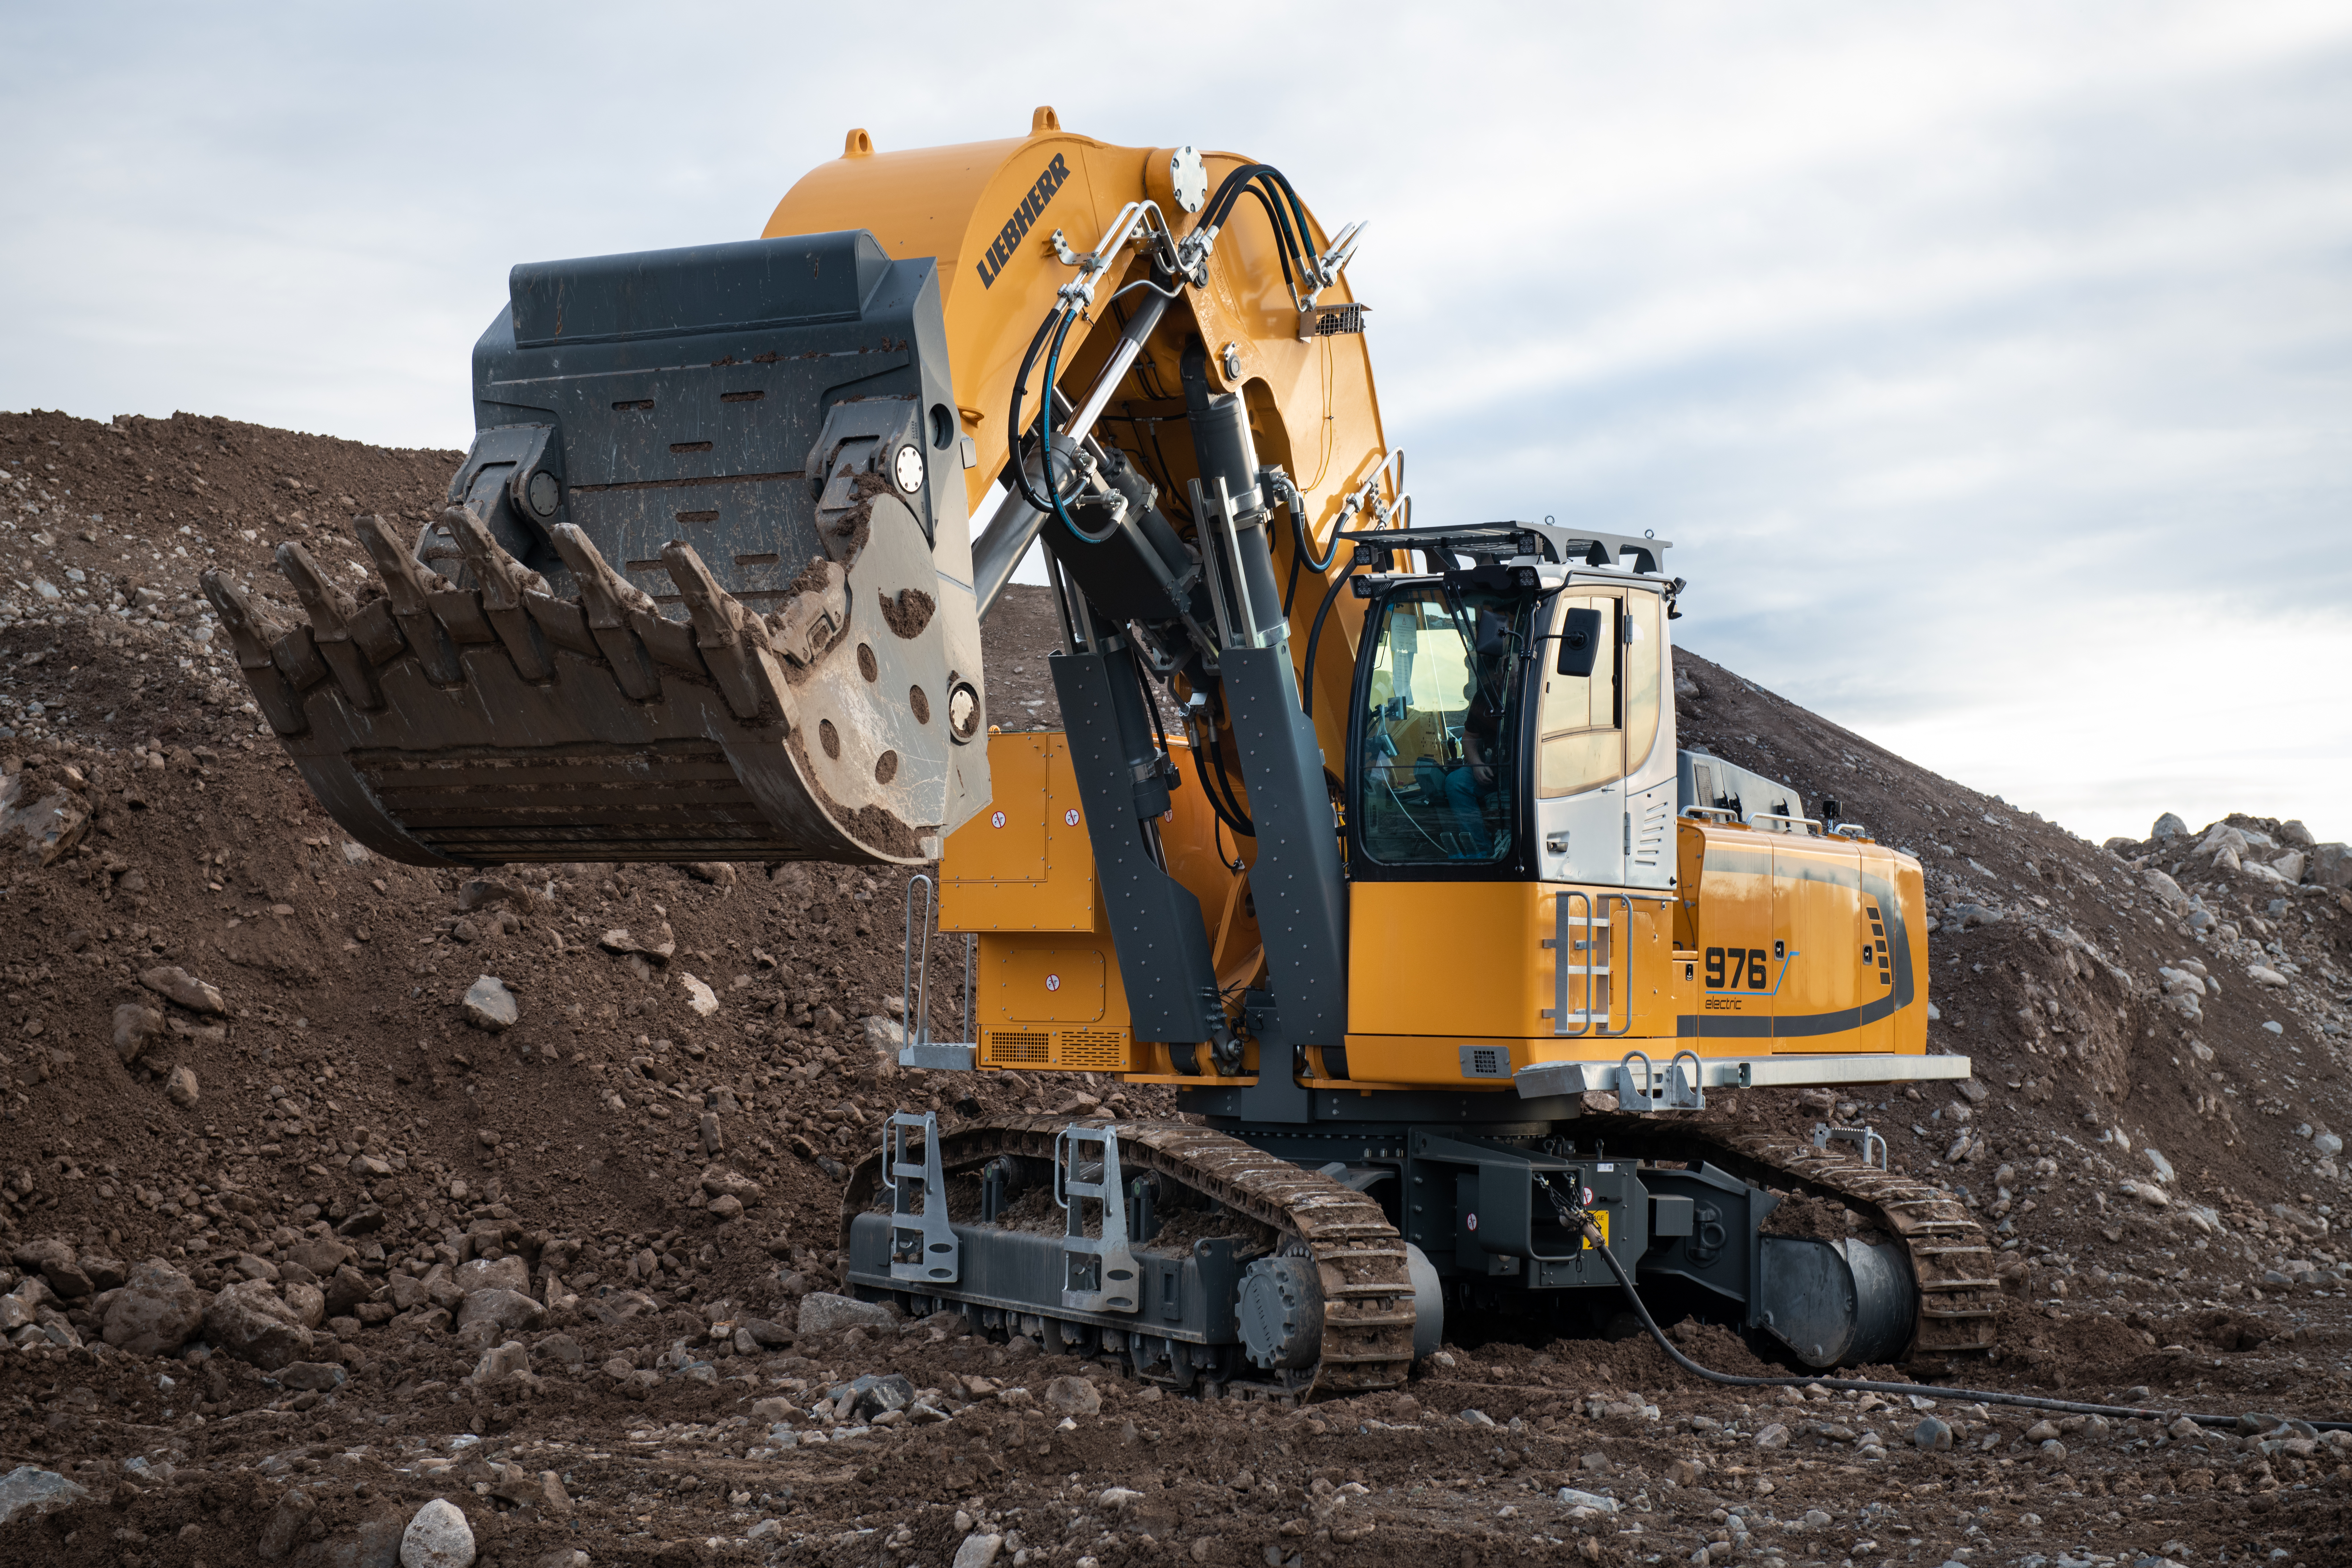 Not just extremely quiet, the R 976-E electric crawler excavator is also guaranteed to produce zero gas emissions.